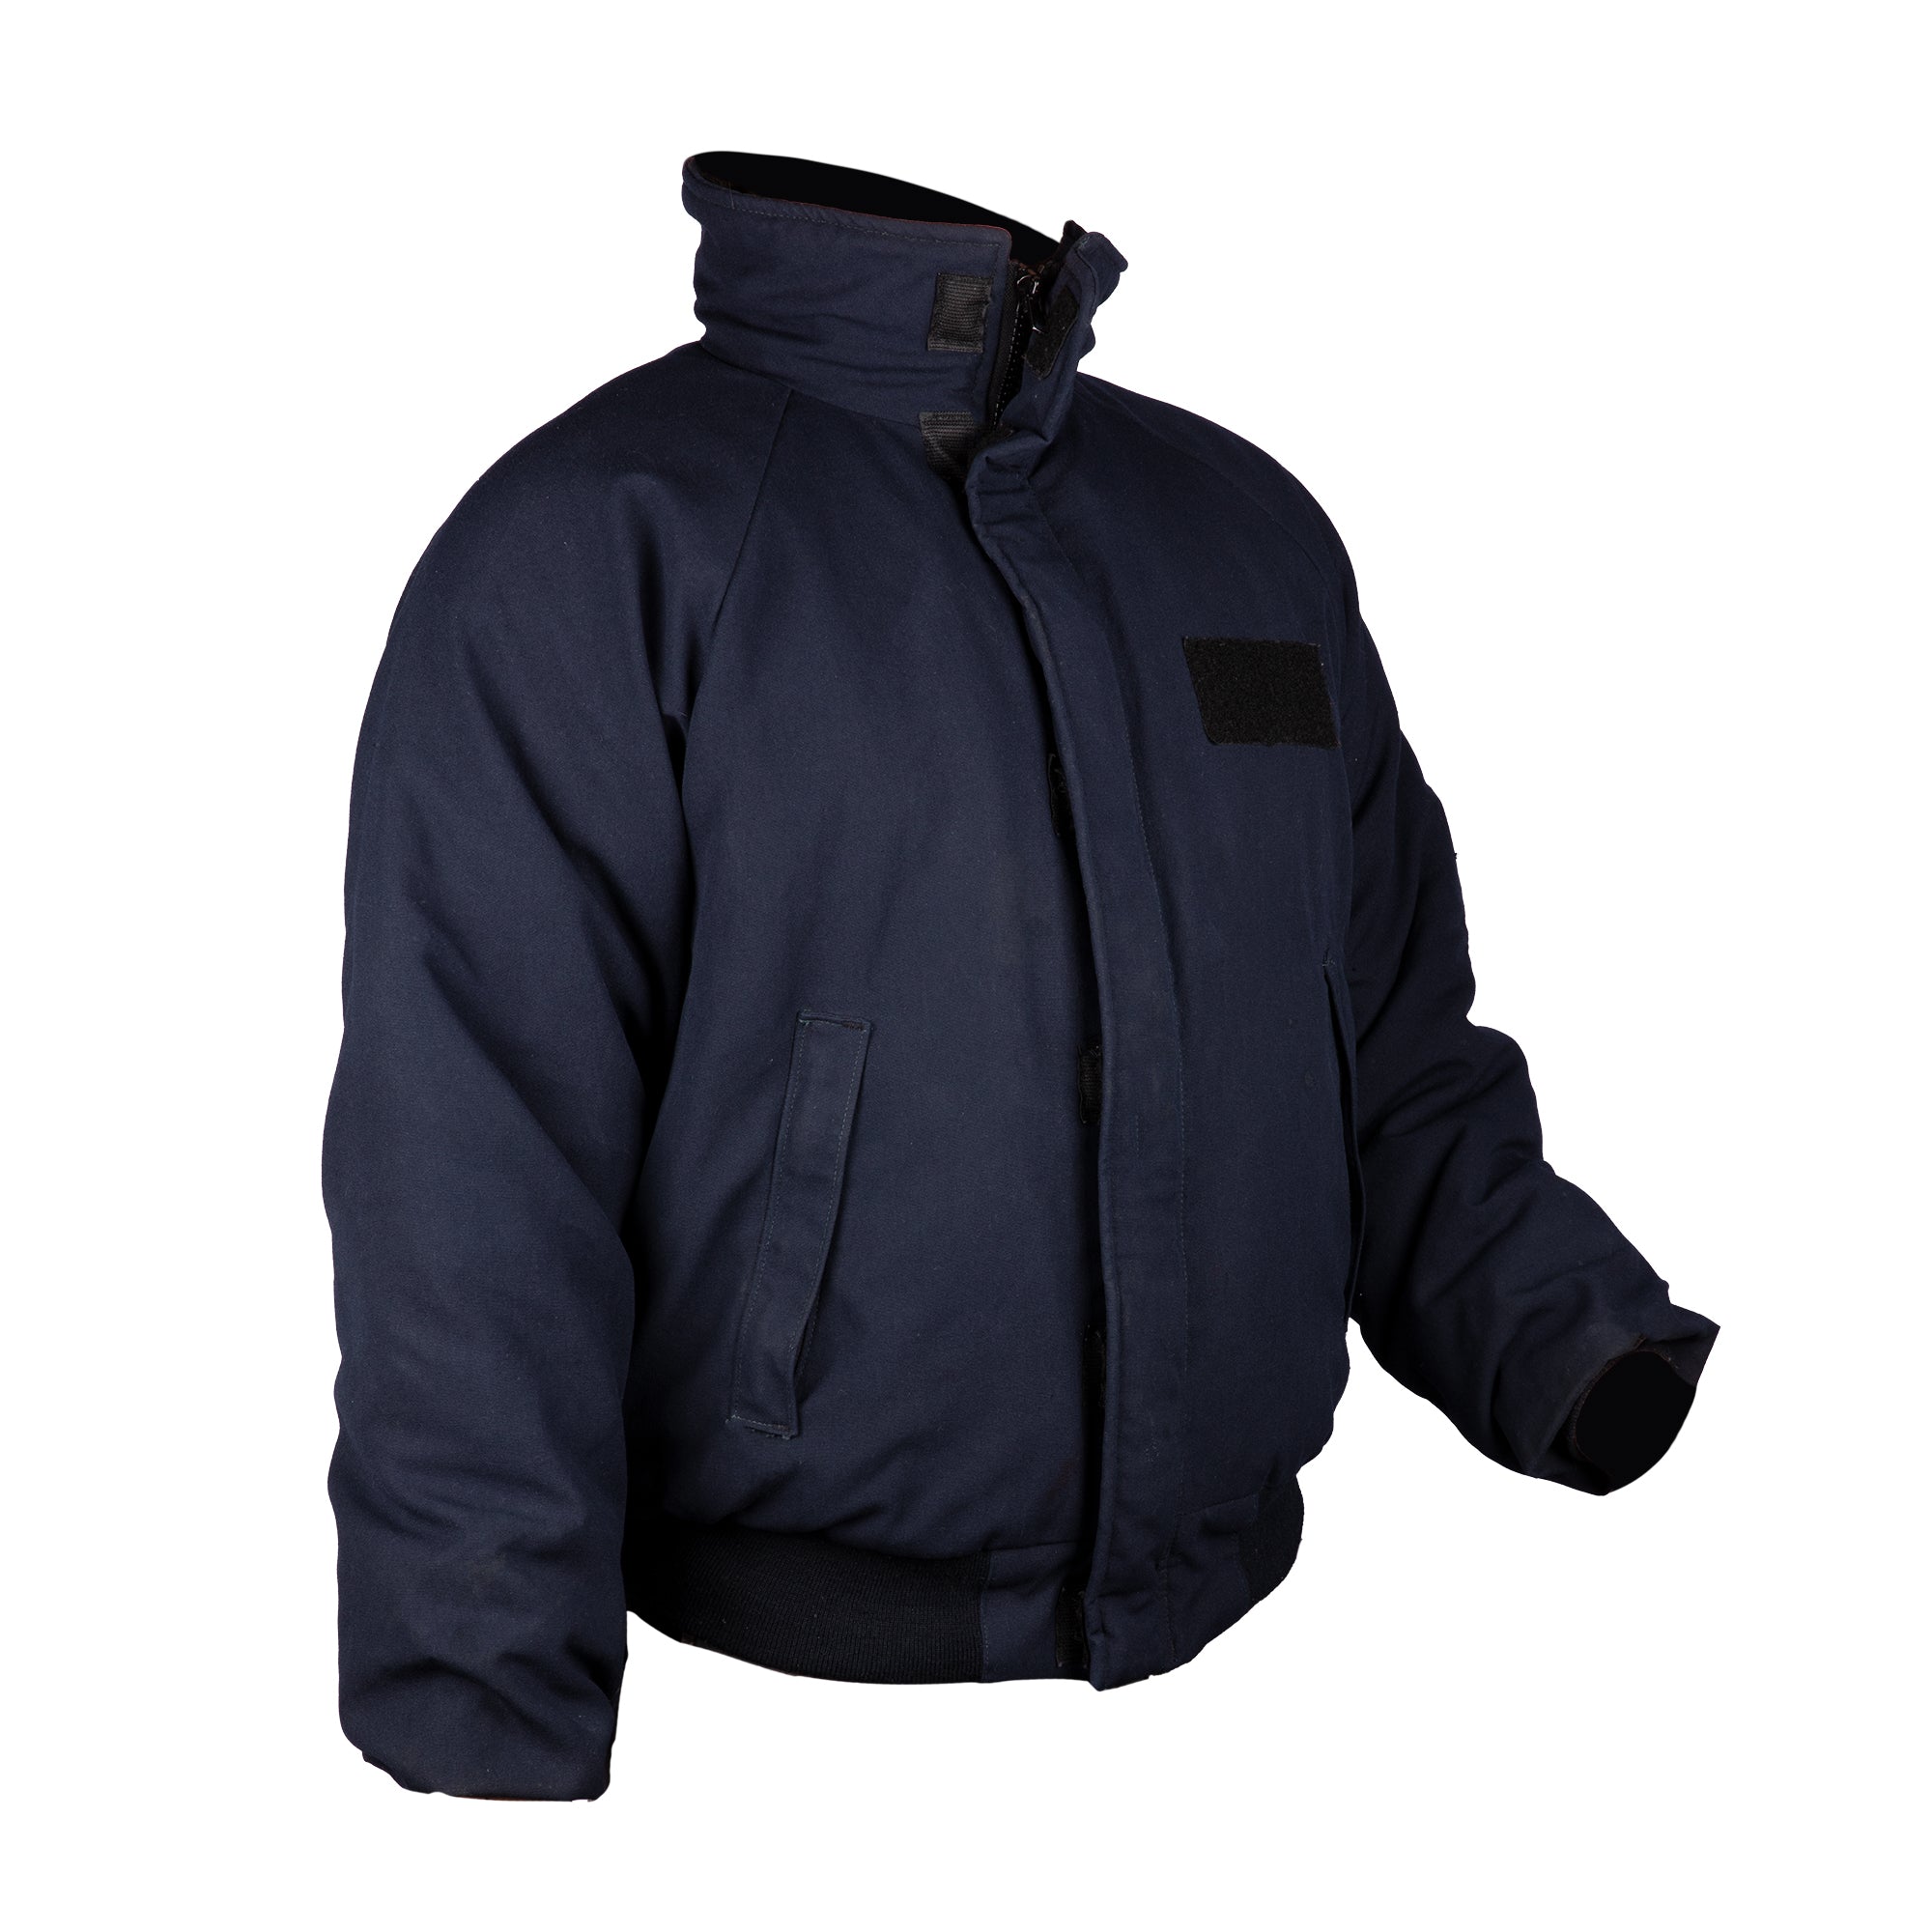 NAVY Shipboard Cold Weather Jacket